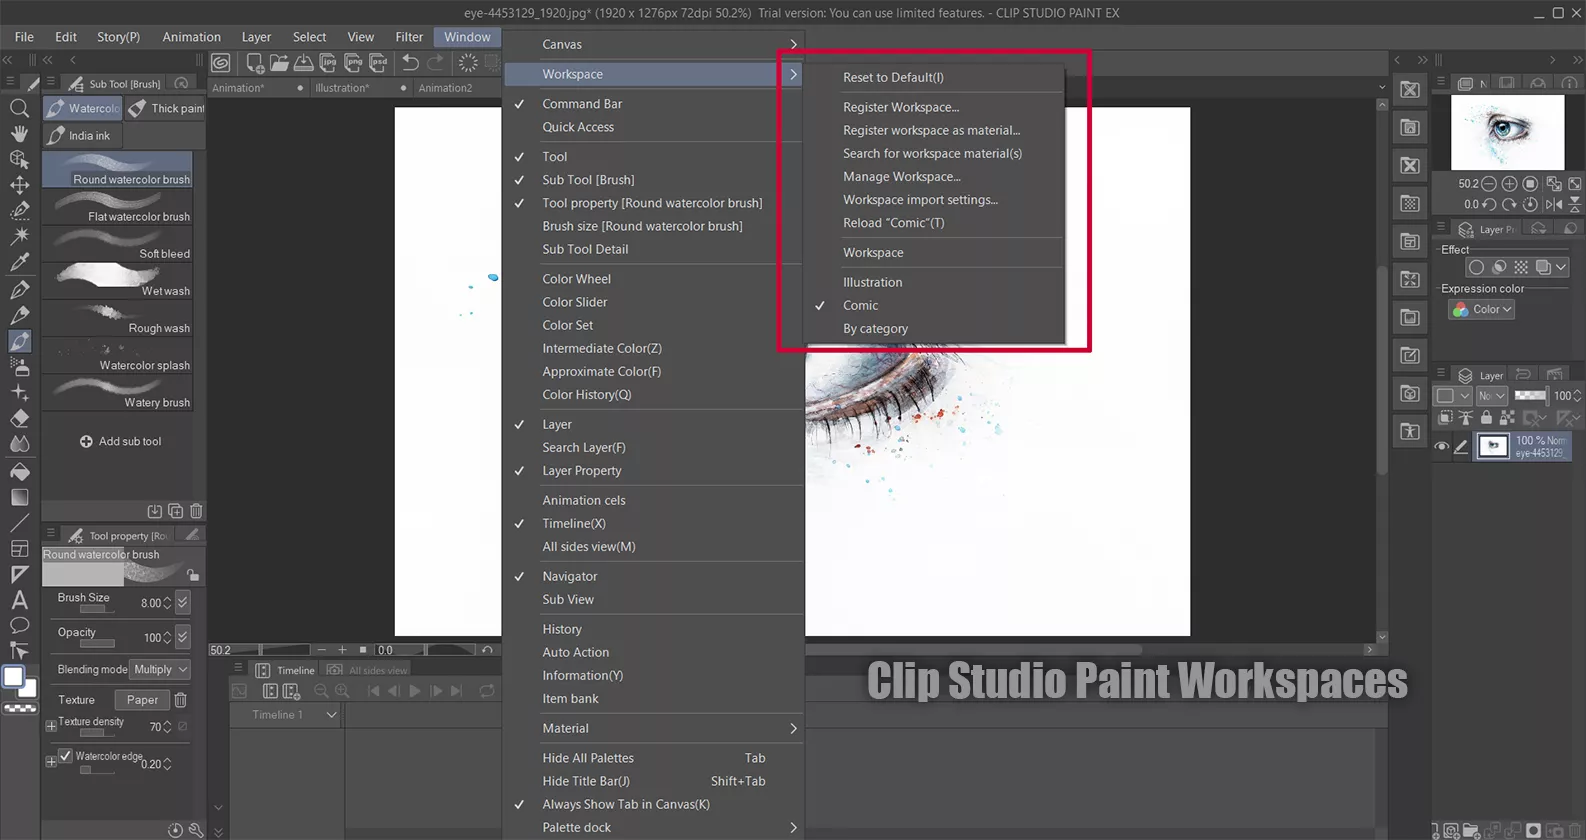 Clip Studio Paint vs. Photoshop - Which is the Best in 2022?